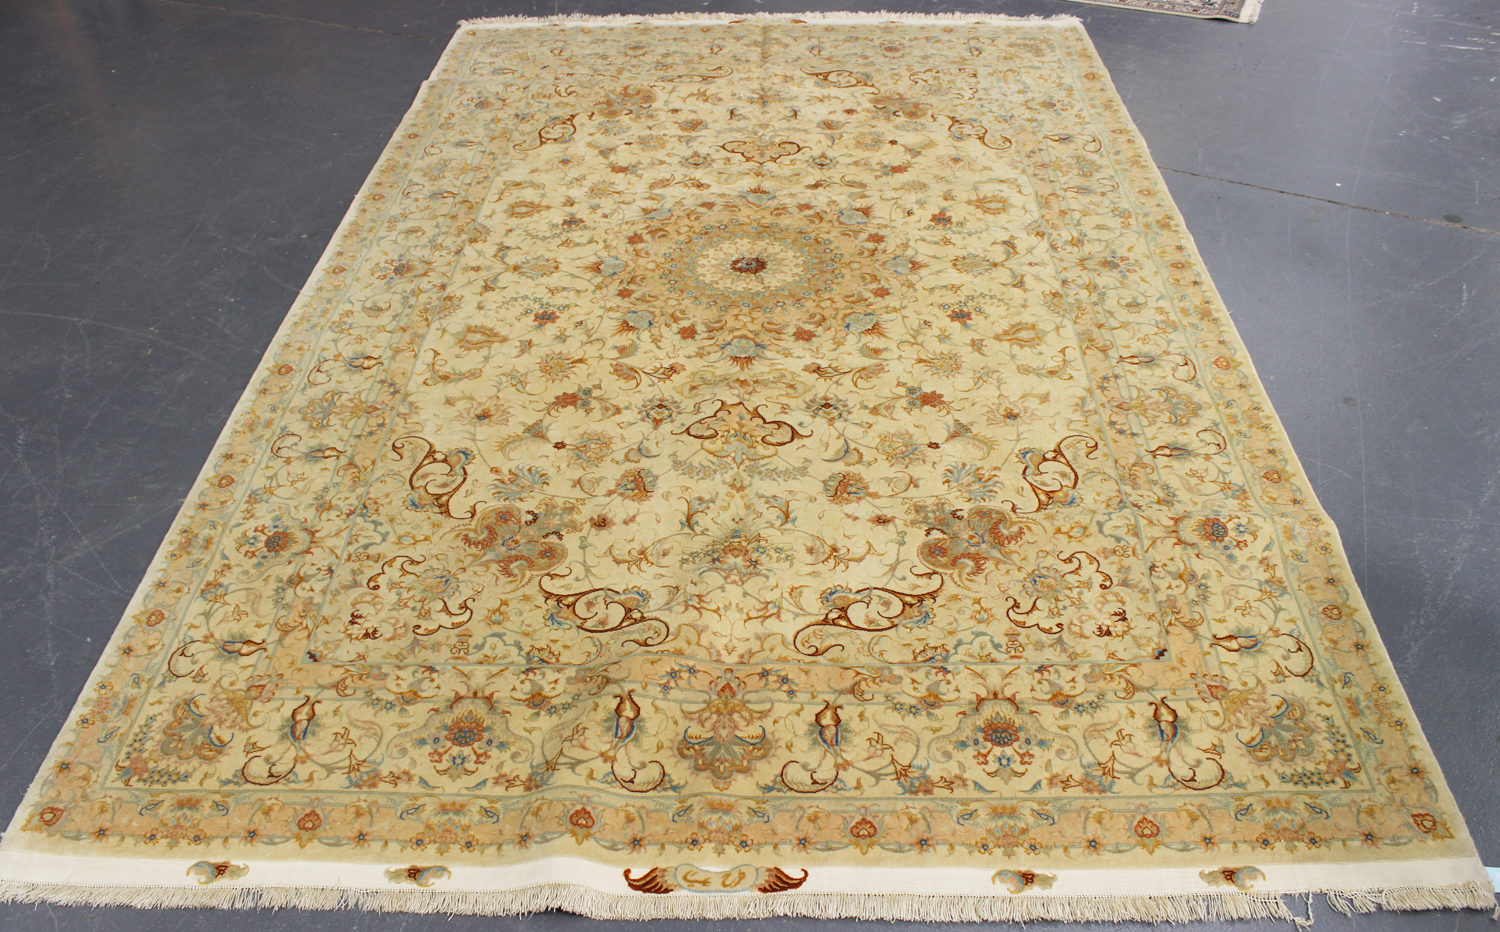 A fine Tabriz carpet, Central Persia, modern, the cream field with a flowerhead medallion, supported